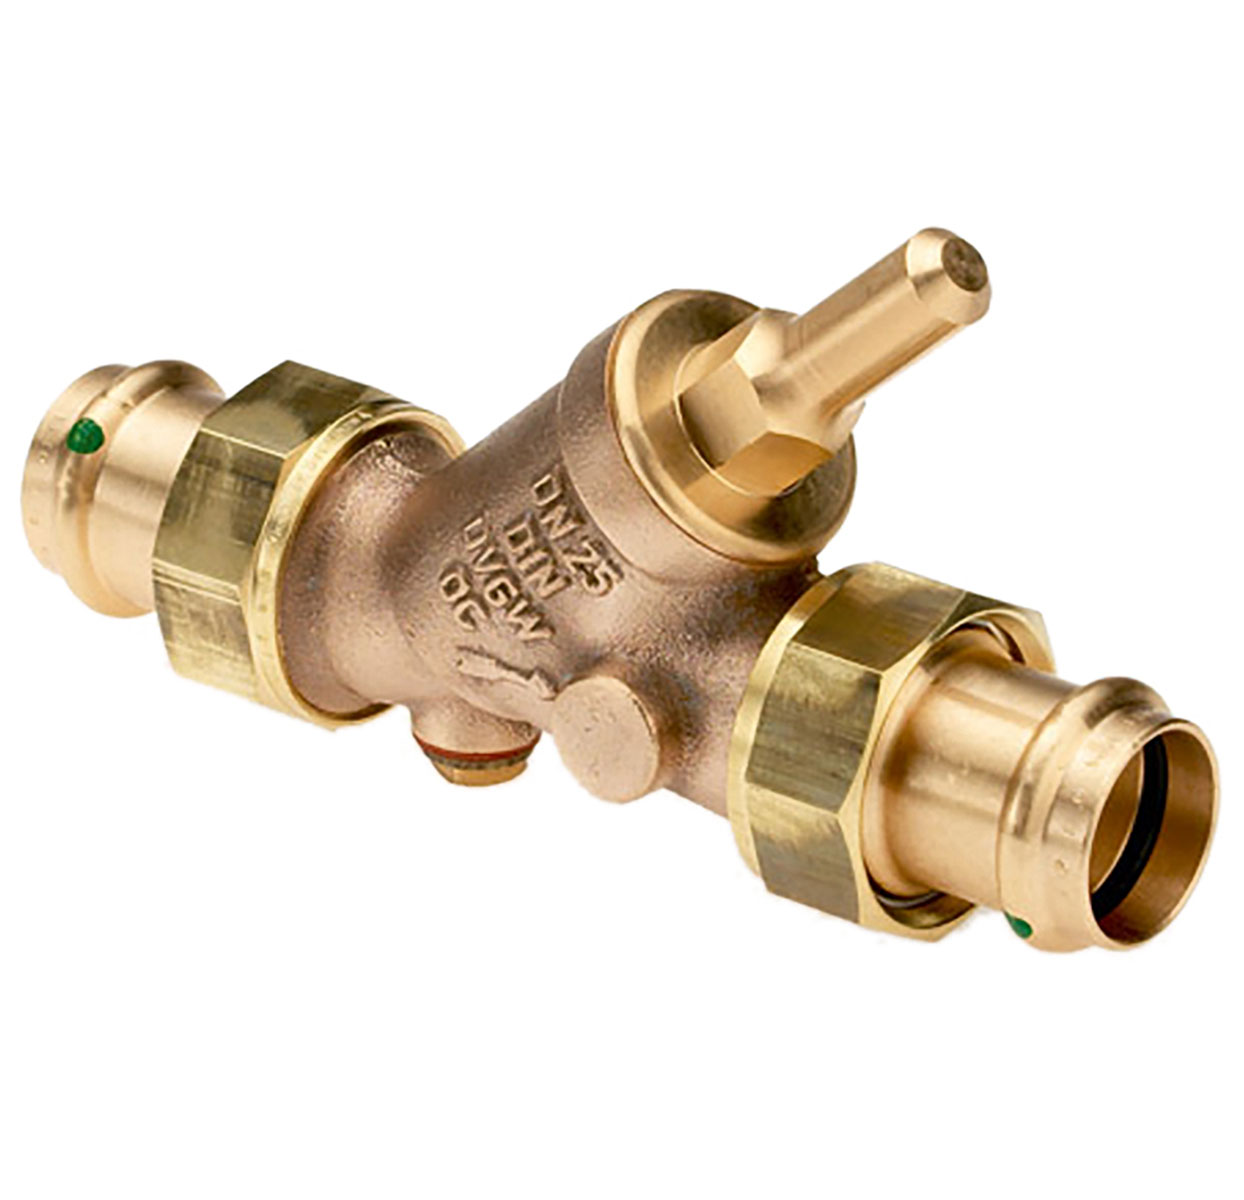 3730540 - Red-brass Backflow-preventer male thread, Viega Profipress, without drain valve